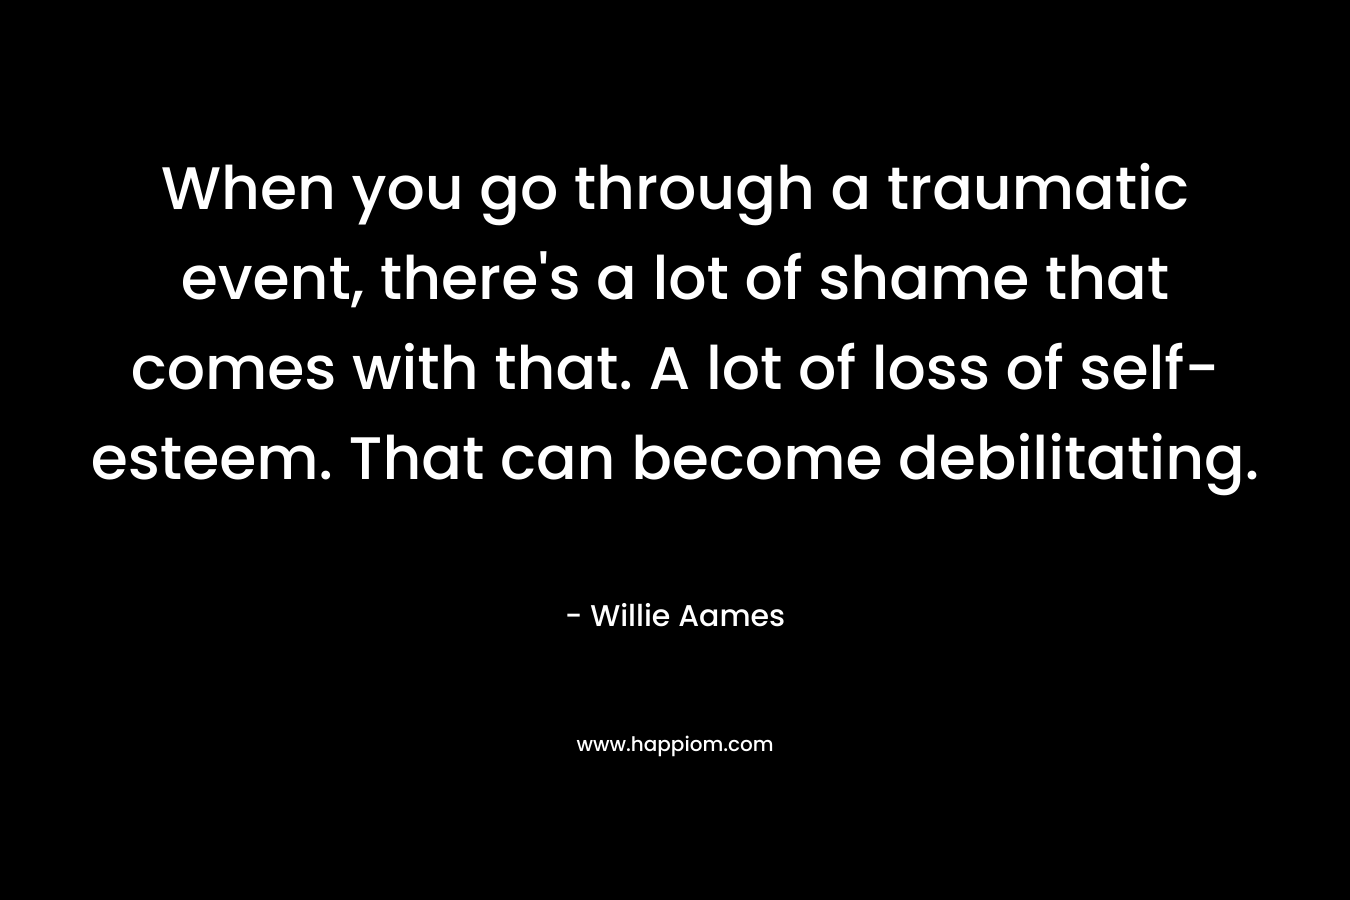 When you go through a traumatic event, there's a lot of shame that comes with that. A lot of loss of self-esteem. That can become debilitating.